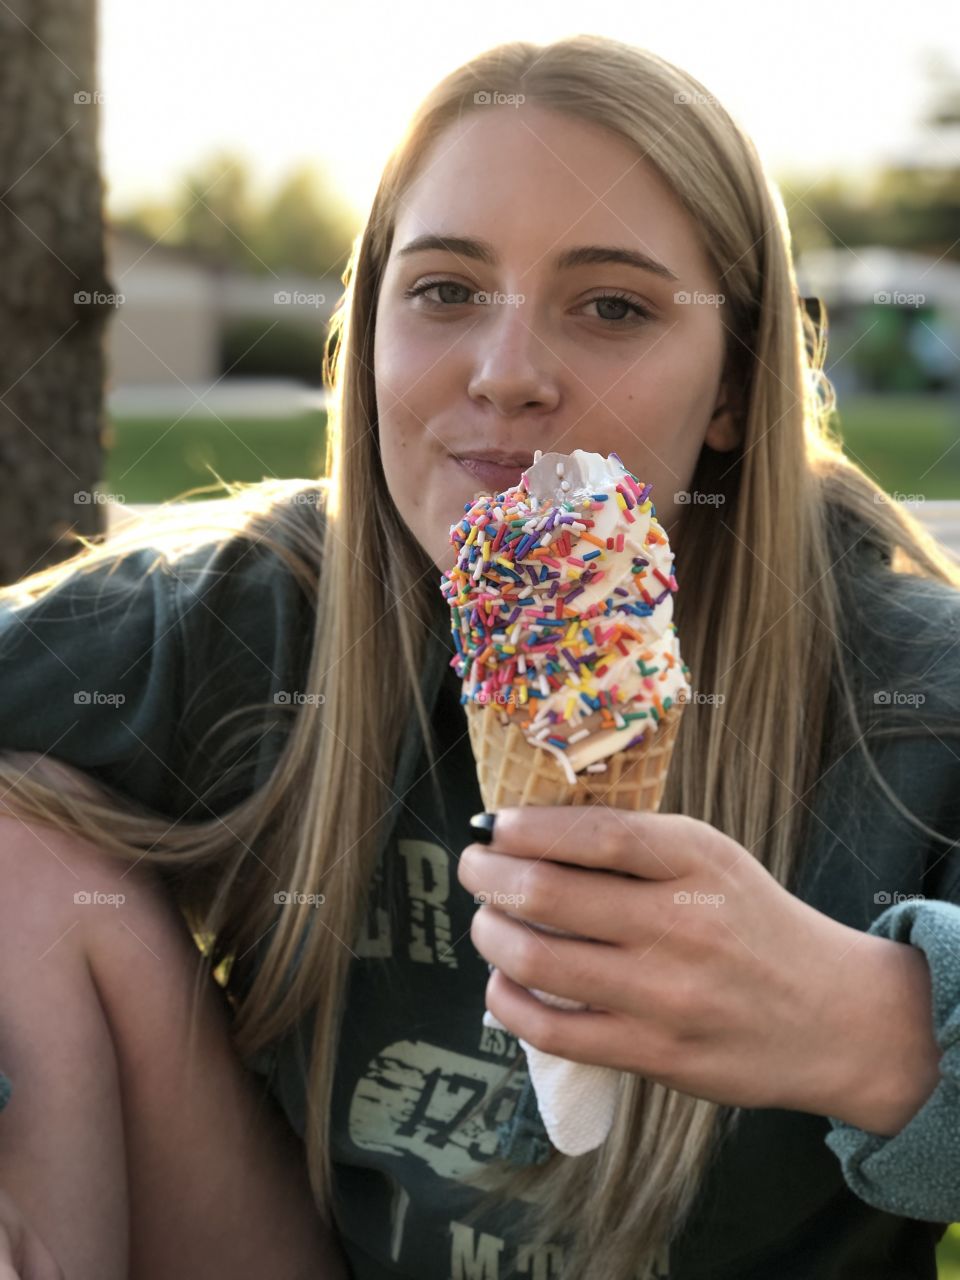 A twist Ice cream cone with sprinkles in hand of girl during a summer evening.